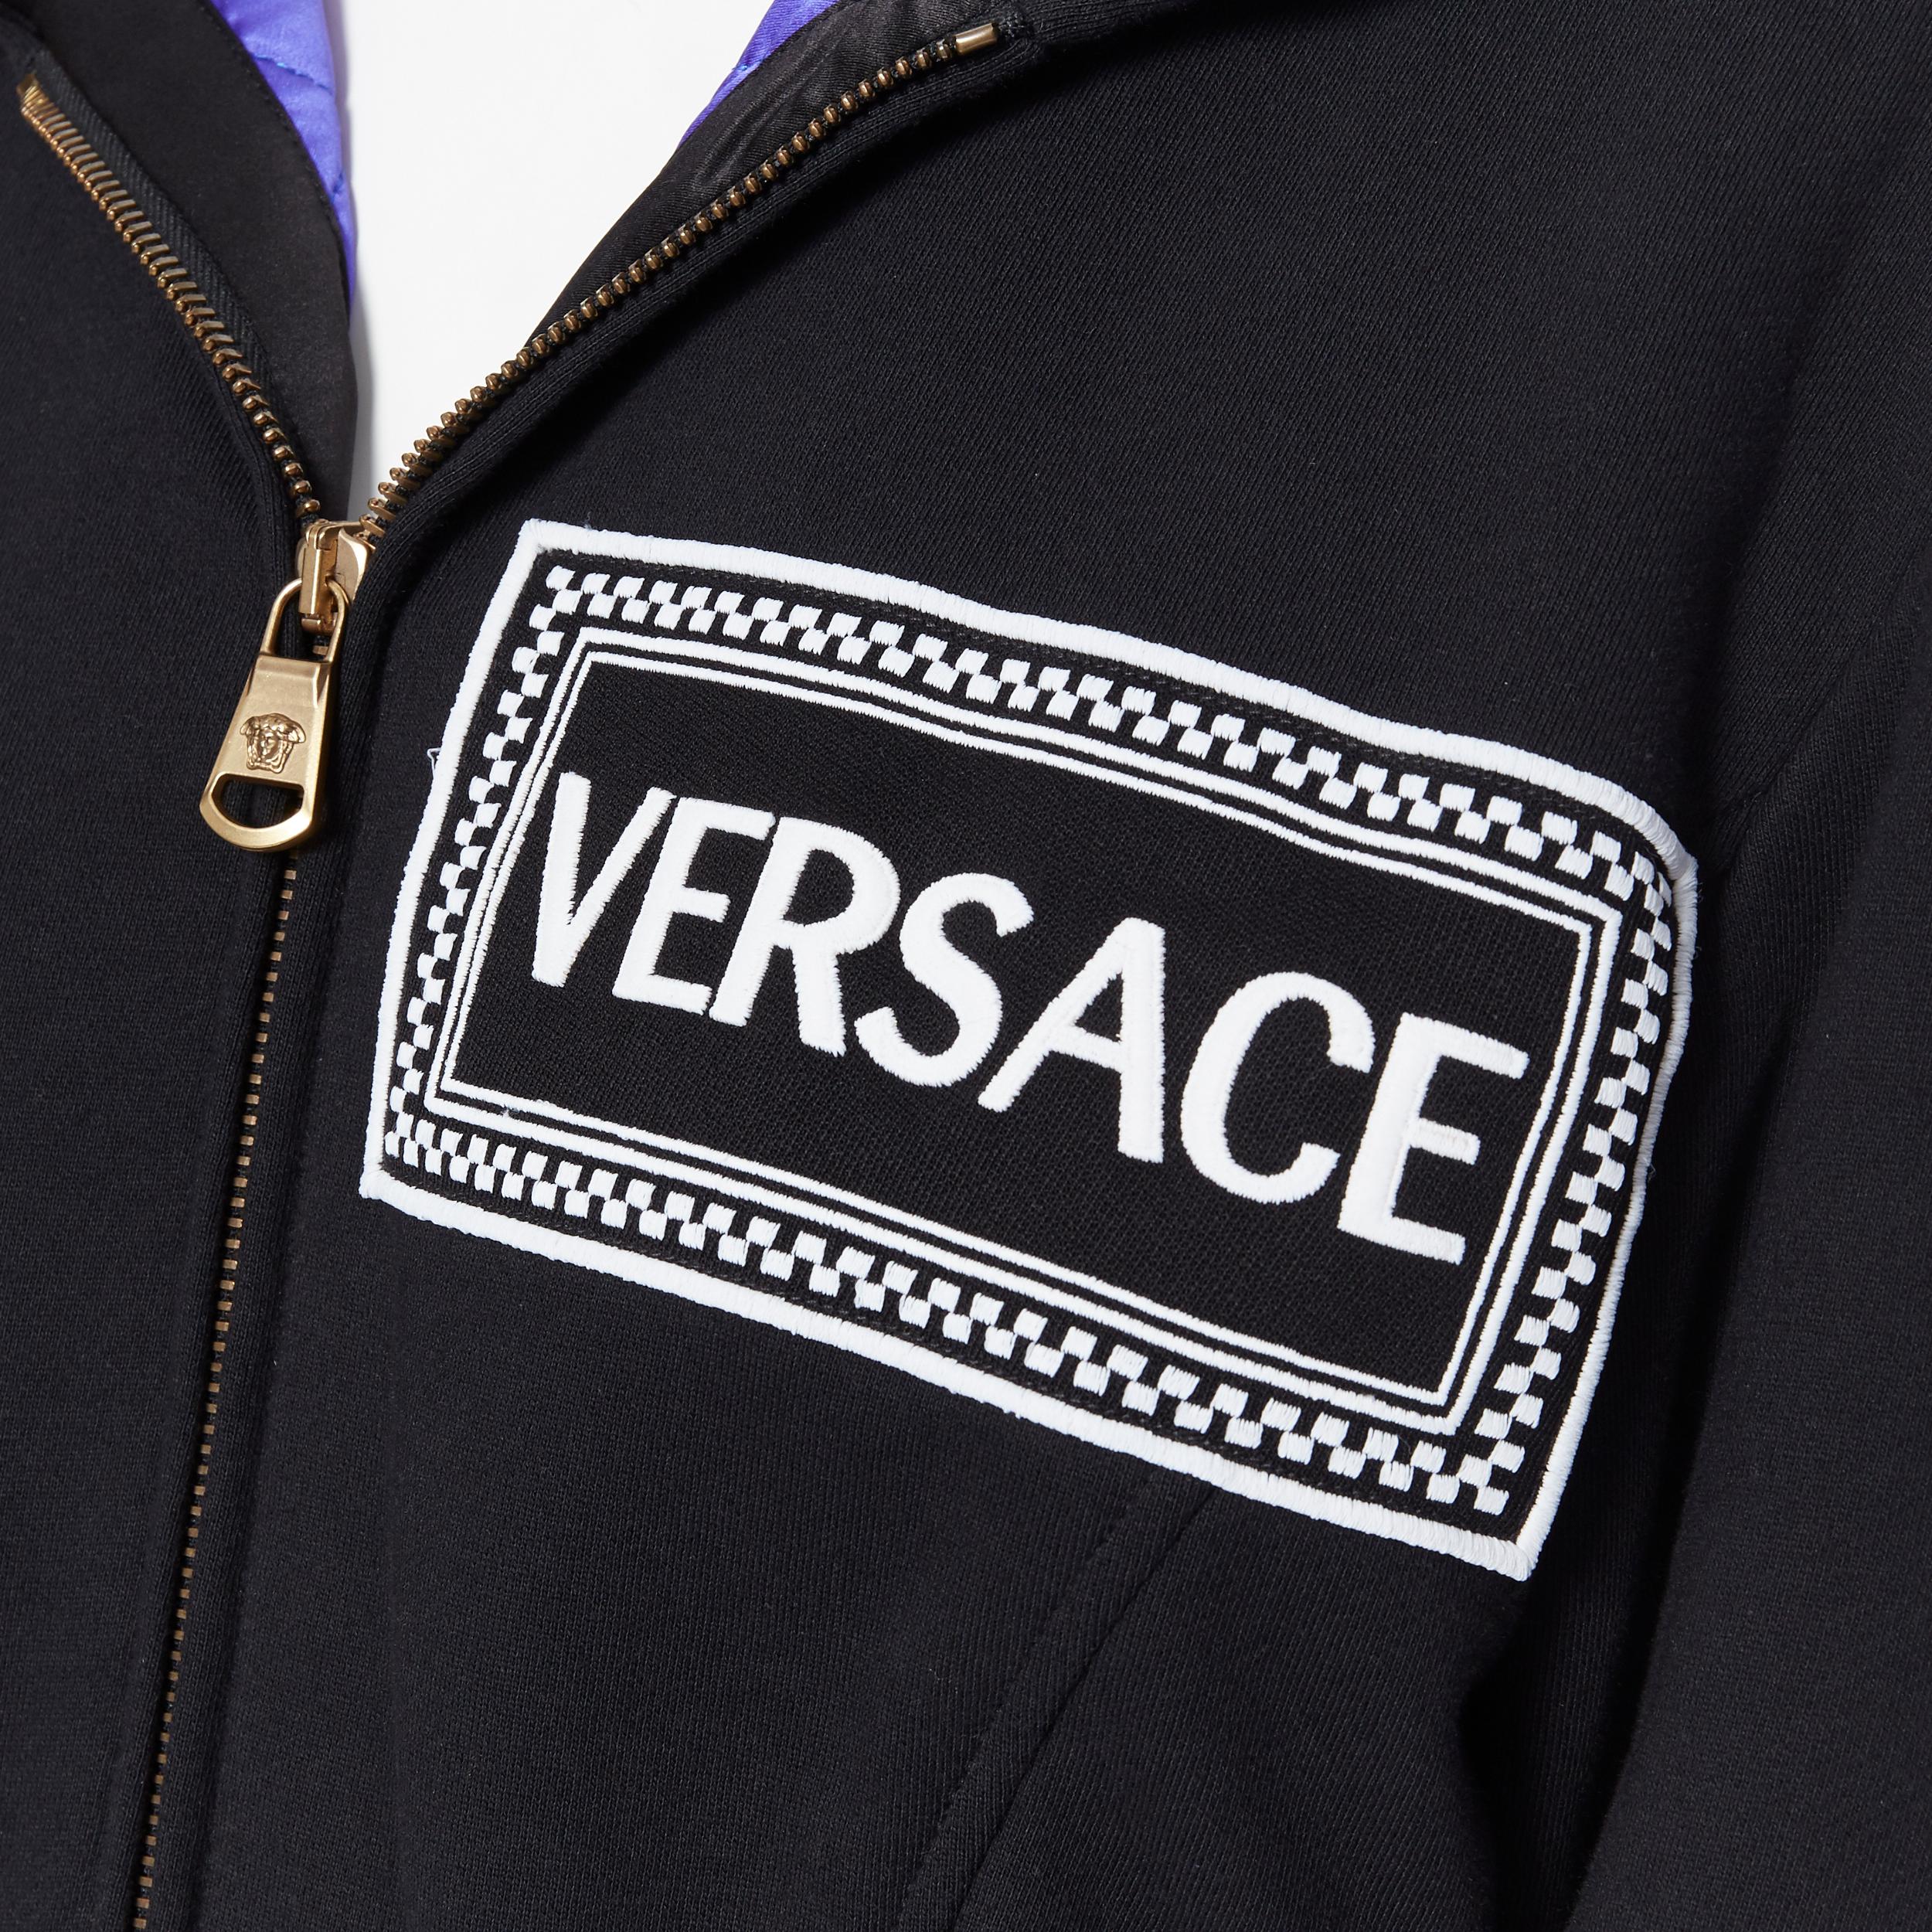 new VERSACE AW18 Runway black logo purple quilted lining zip cropped hoodie S
Brand: Versace
Designer: Donatella Versace
Collection: Fall Winter 2018
Model Name / Style: Cropped hoodie
Material: Cotton
Color: Black, purple
Pattern: Solid
Closure: